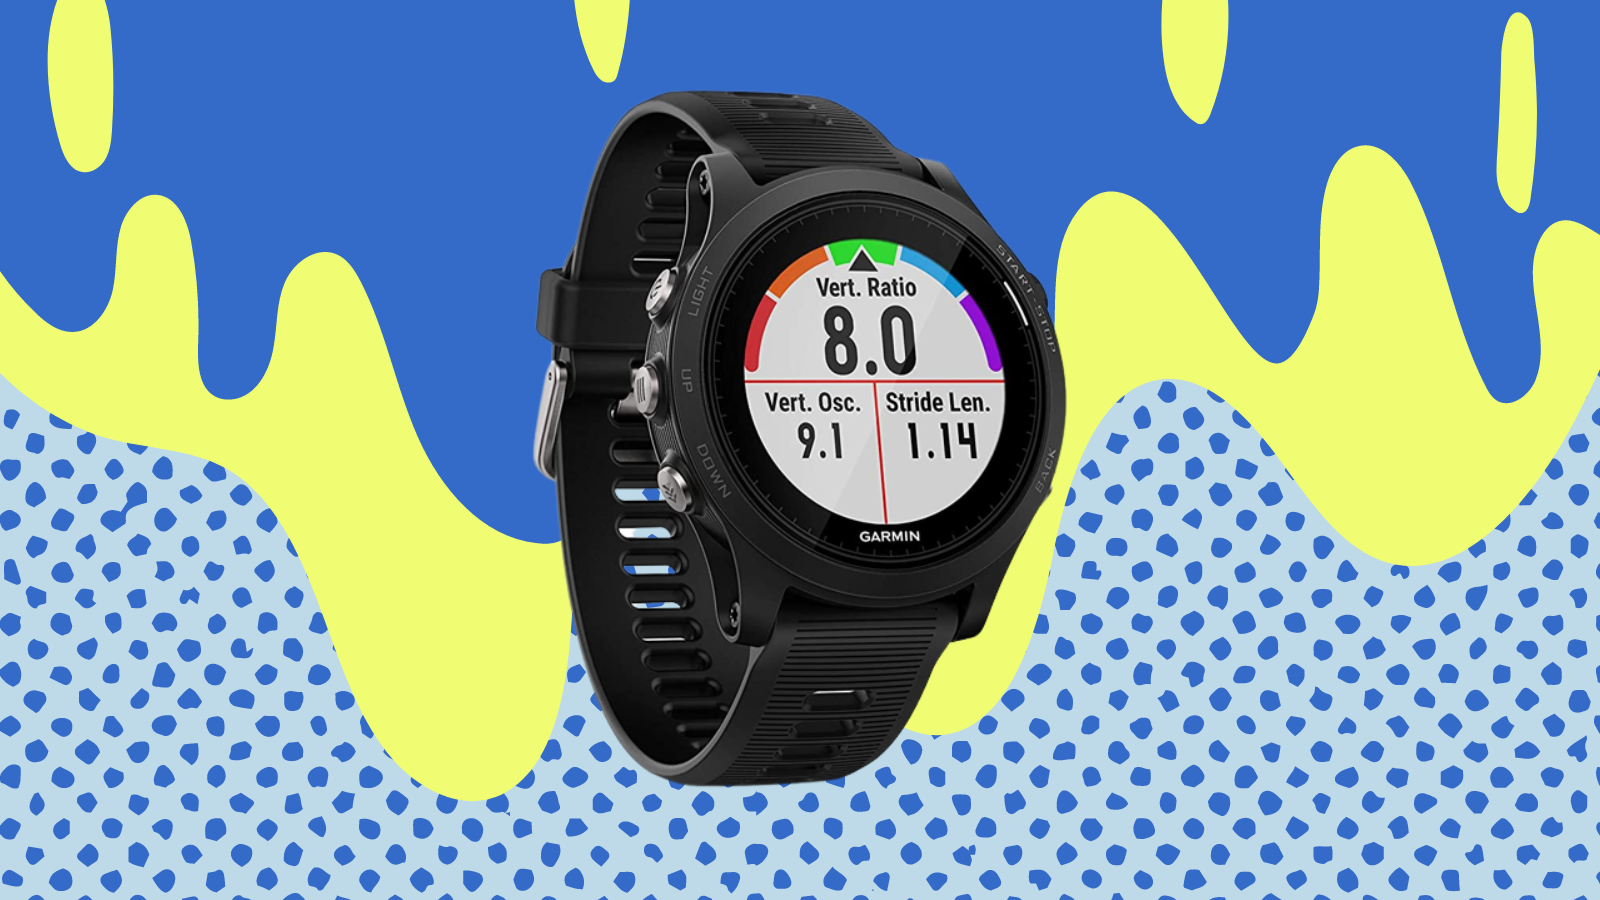 garmin forerunner 935 watch with running stats on screen and blue and yellow background